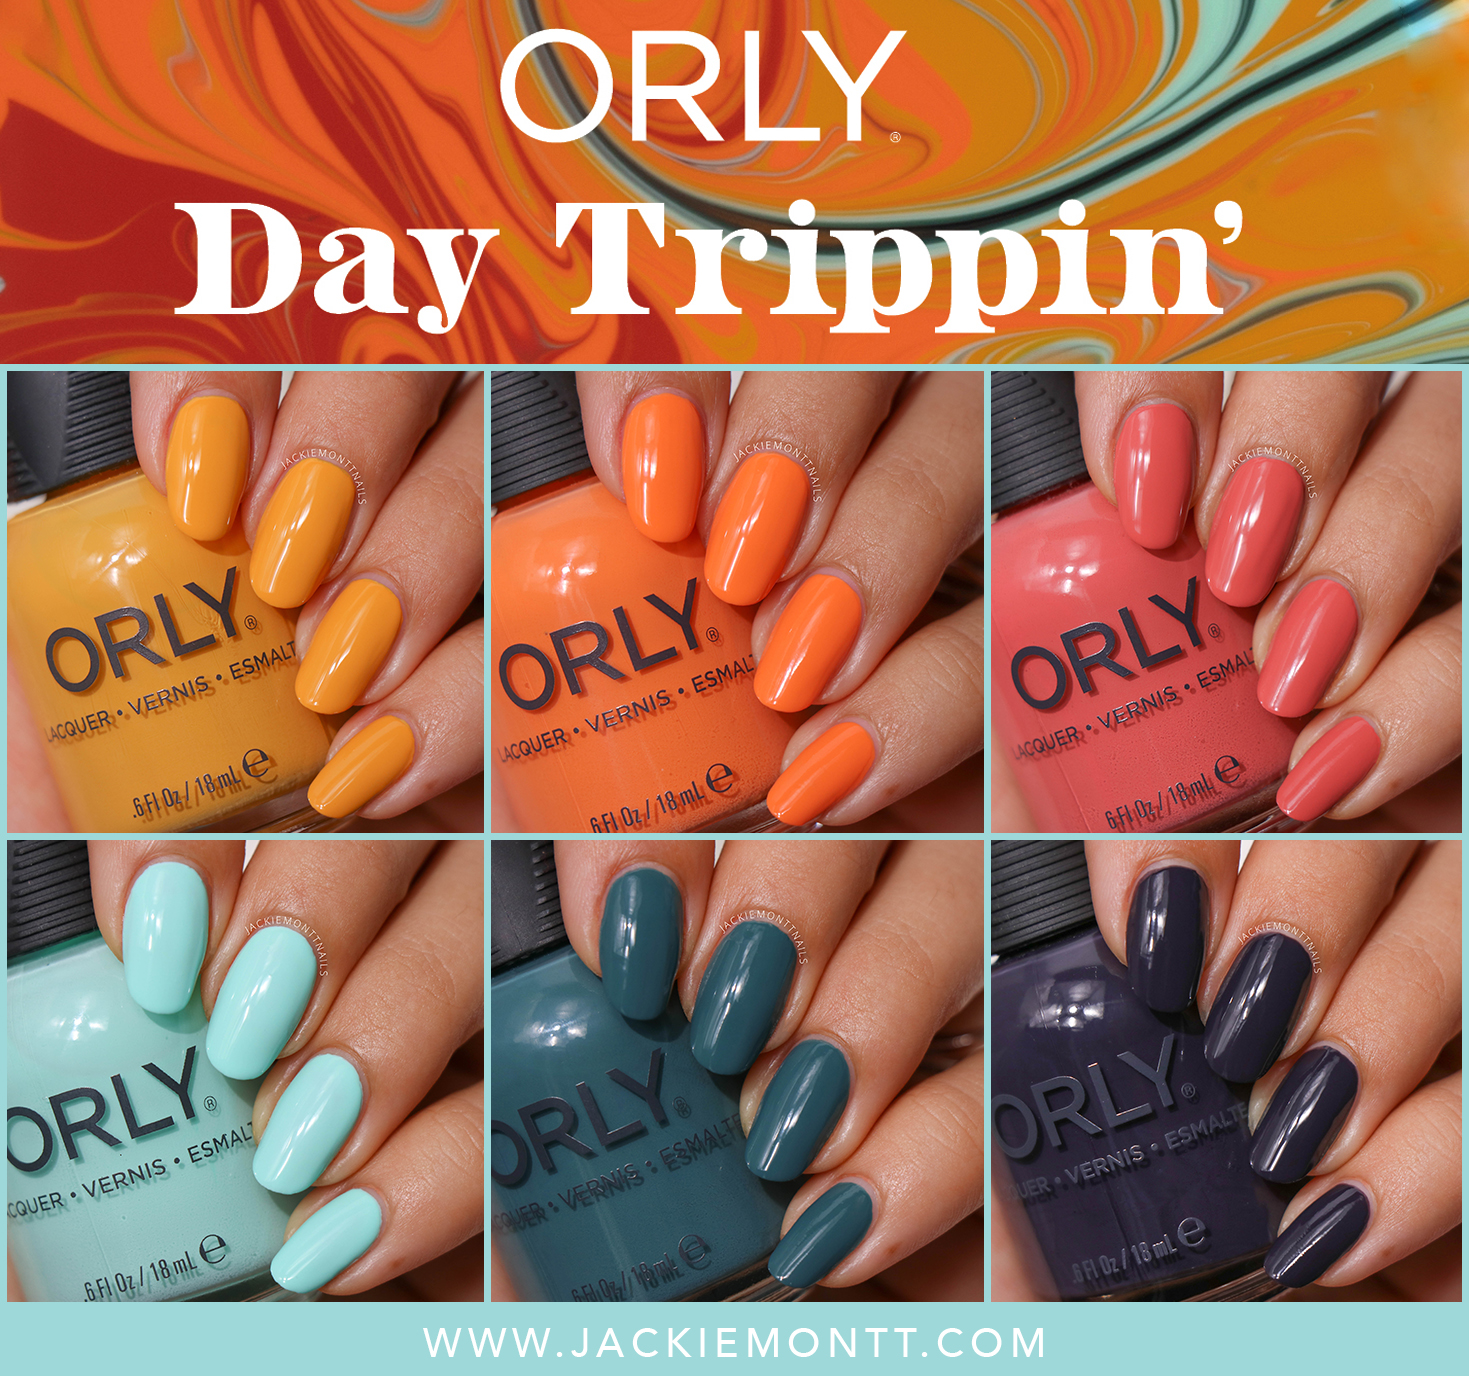 Orly Day Trippin' Swatch & Review [Spring 2021] - JACKIEMONTT